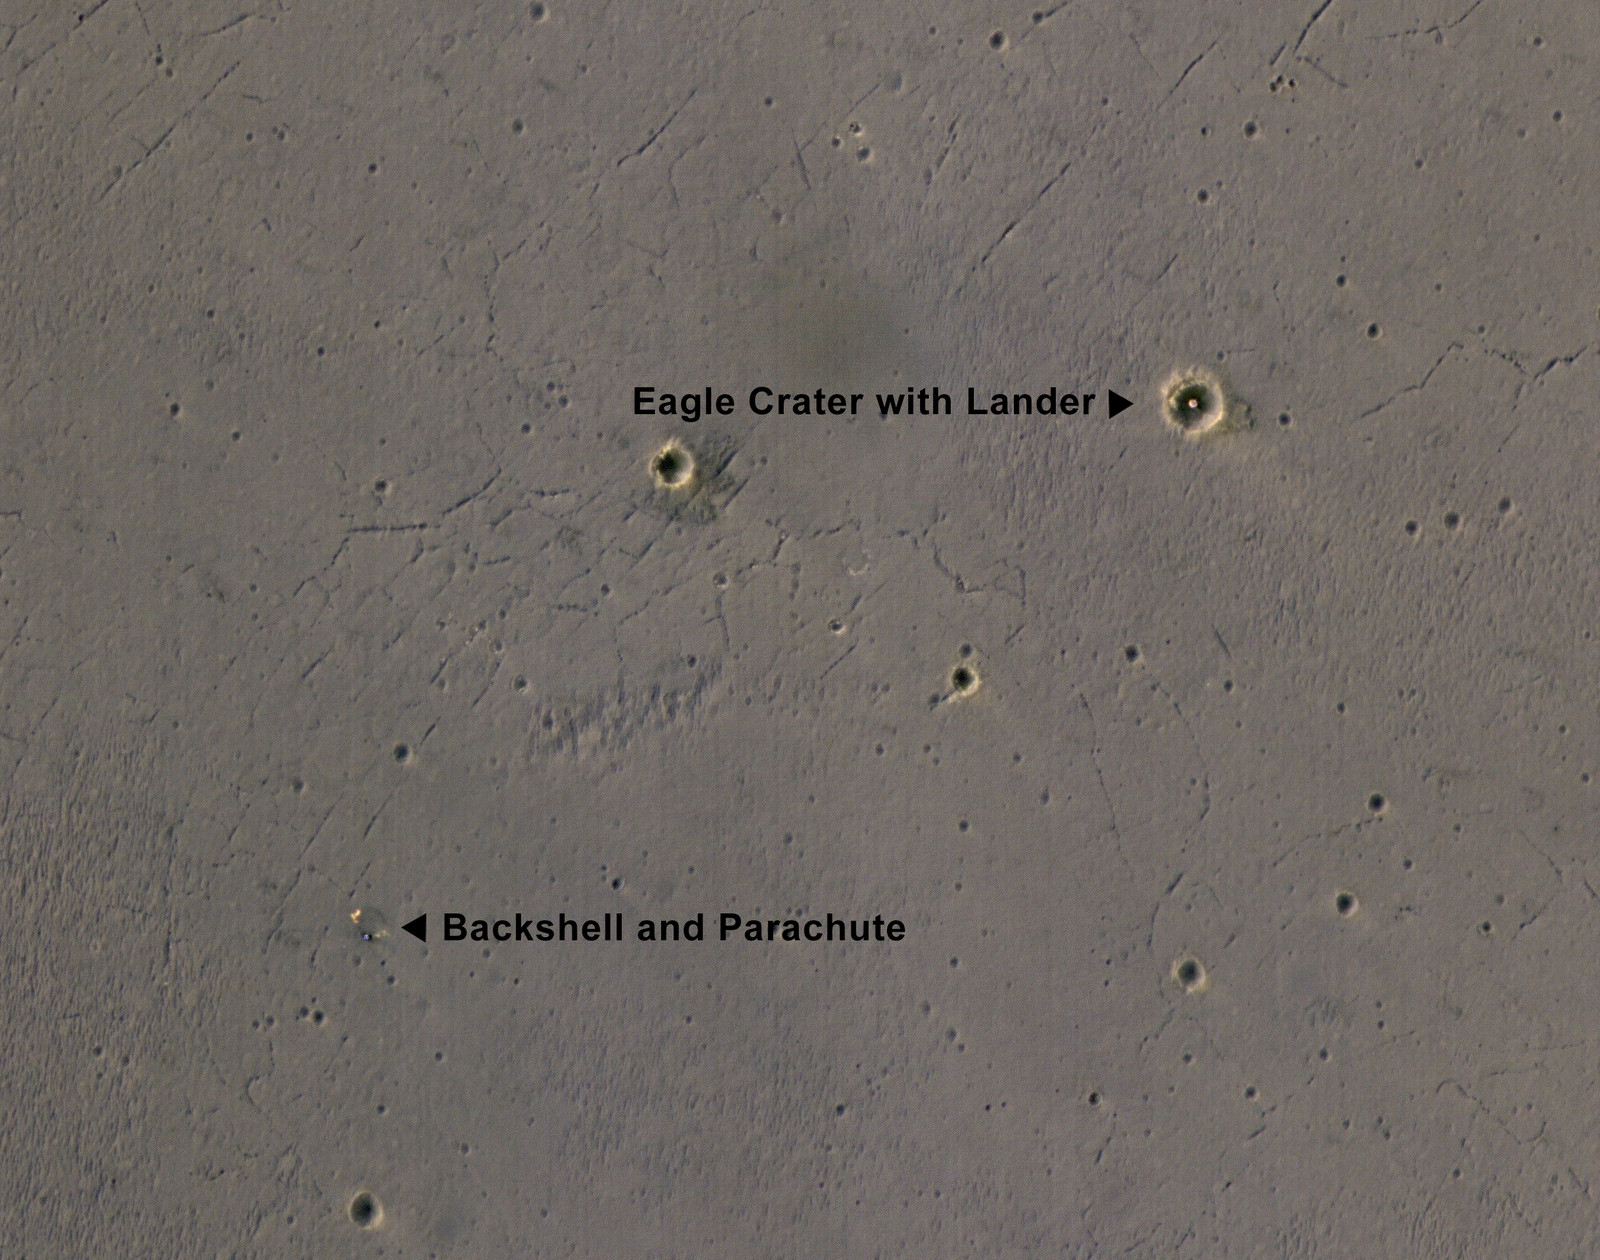 The bright landing  platform left behind by NASA's Mars Exploration Rover Opportunity in 2004 is  visible inside Eagle Crater, where &amp;quot;Opportunity Lander&amp;quot; is indicated  in this annotated, April 8, 2017, image from NASA's Mars Reconnaissance  Orbiter.